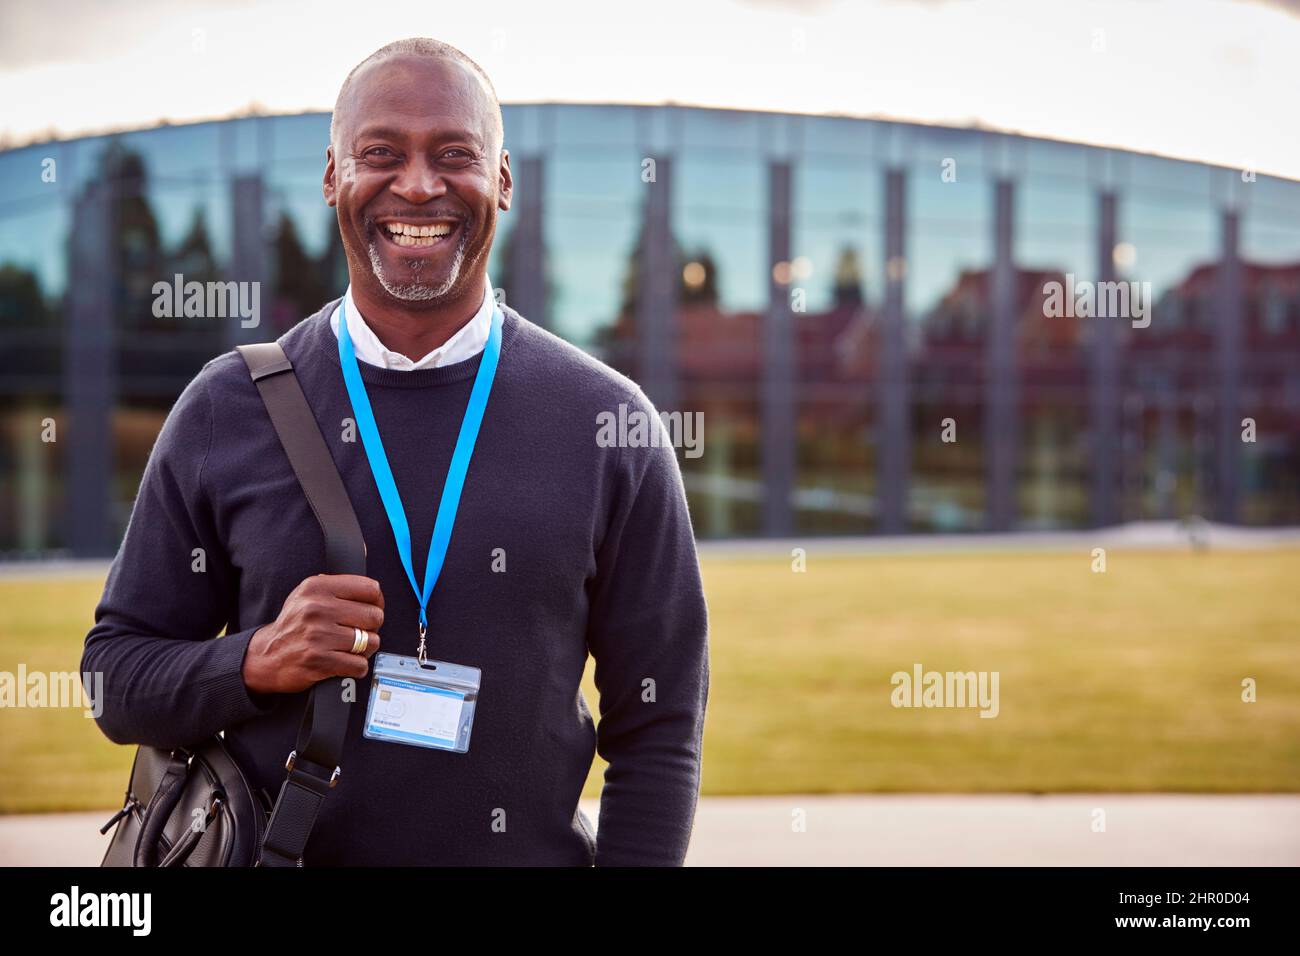 Portrait Of Male University Or College Tutor Outdoors With Modern Campus Building In Background Stock Photo